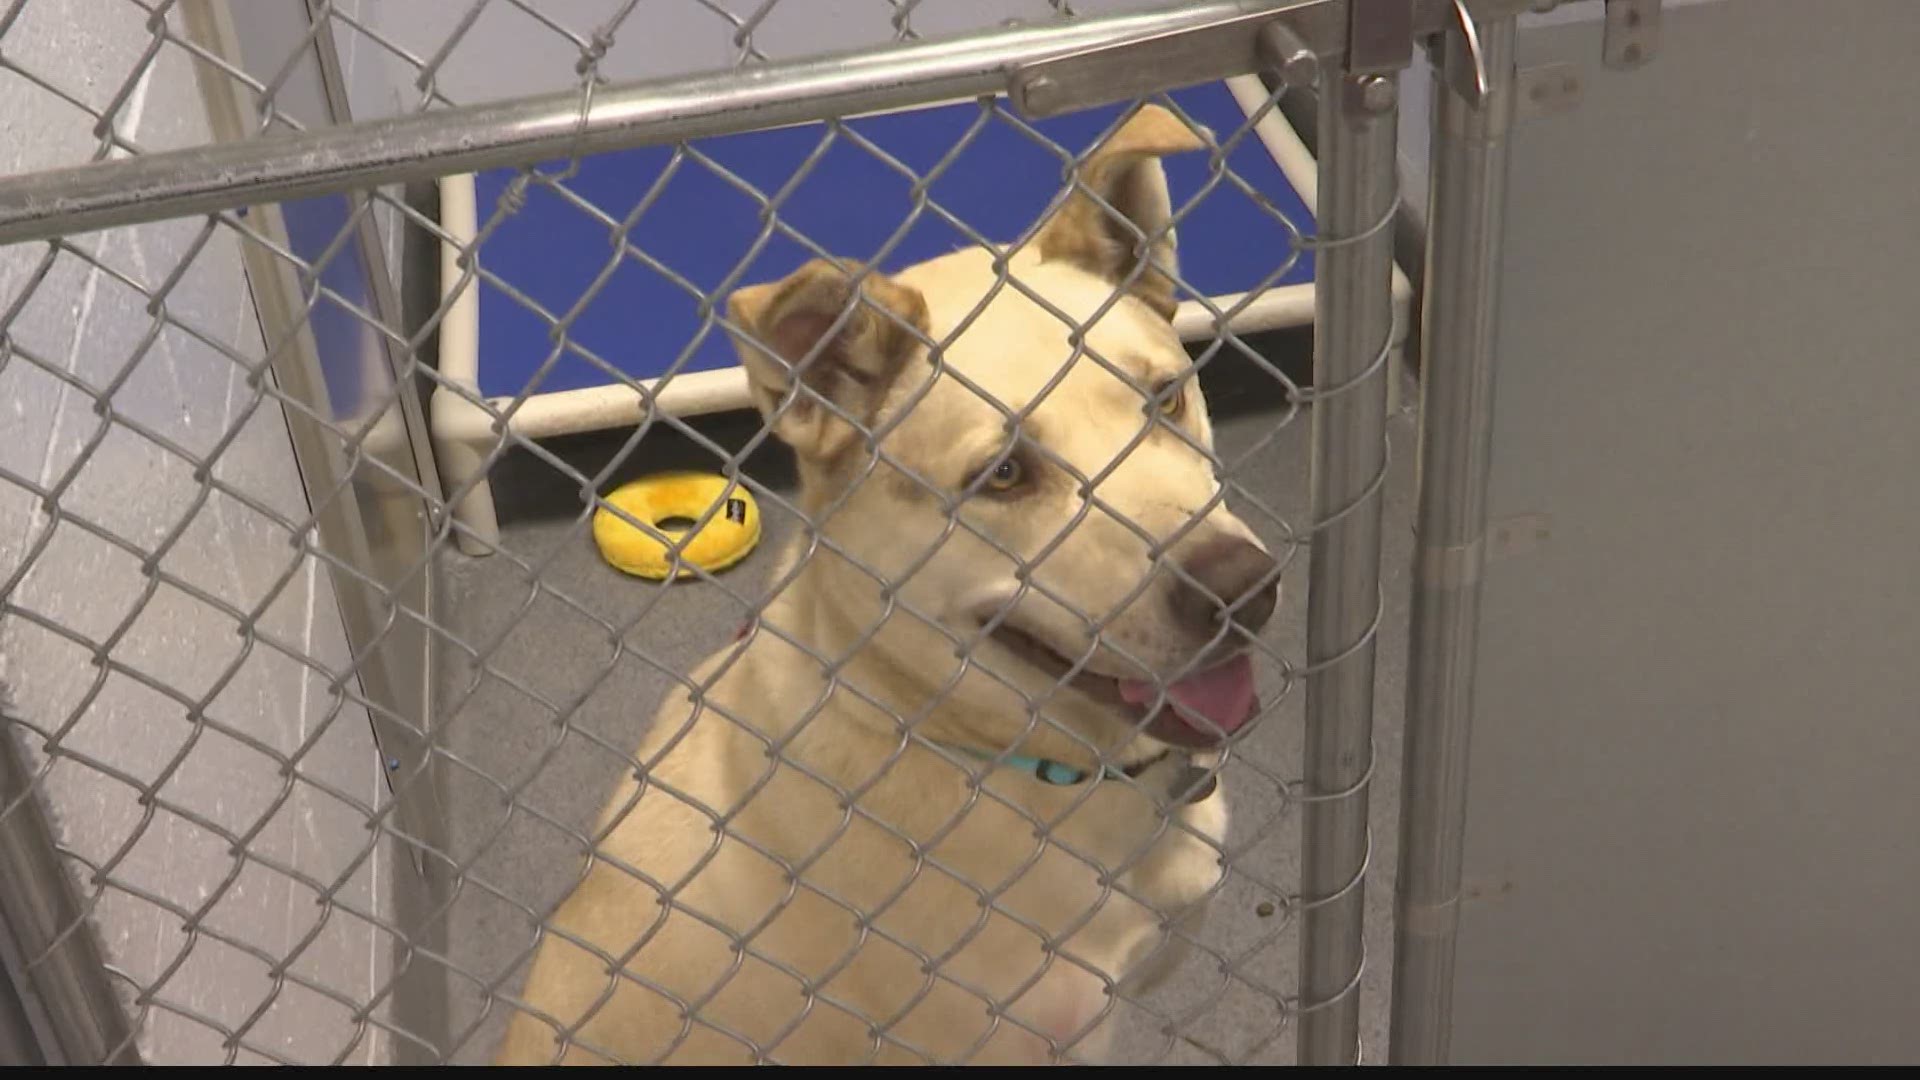 Free adoptions for most animals at Huntsville Animal Services |  